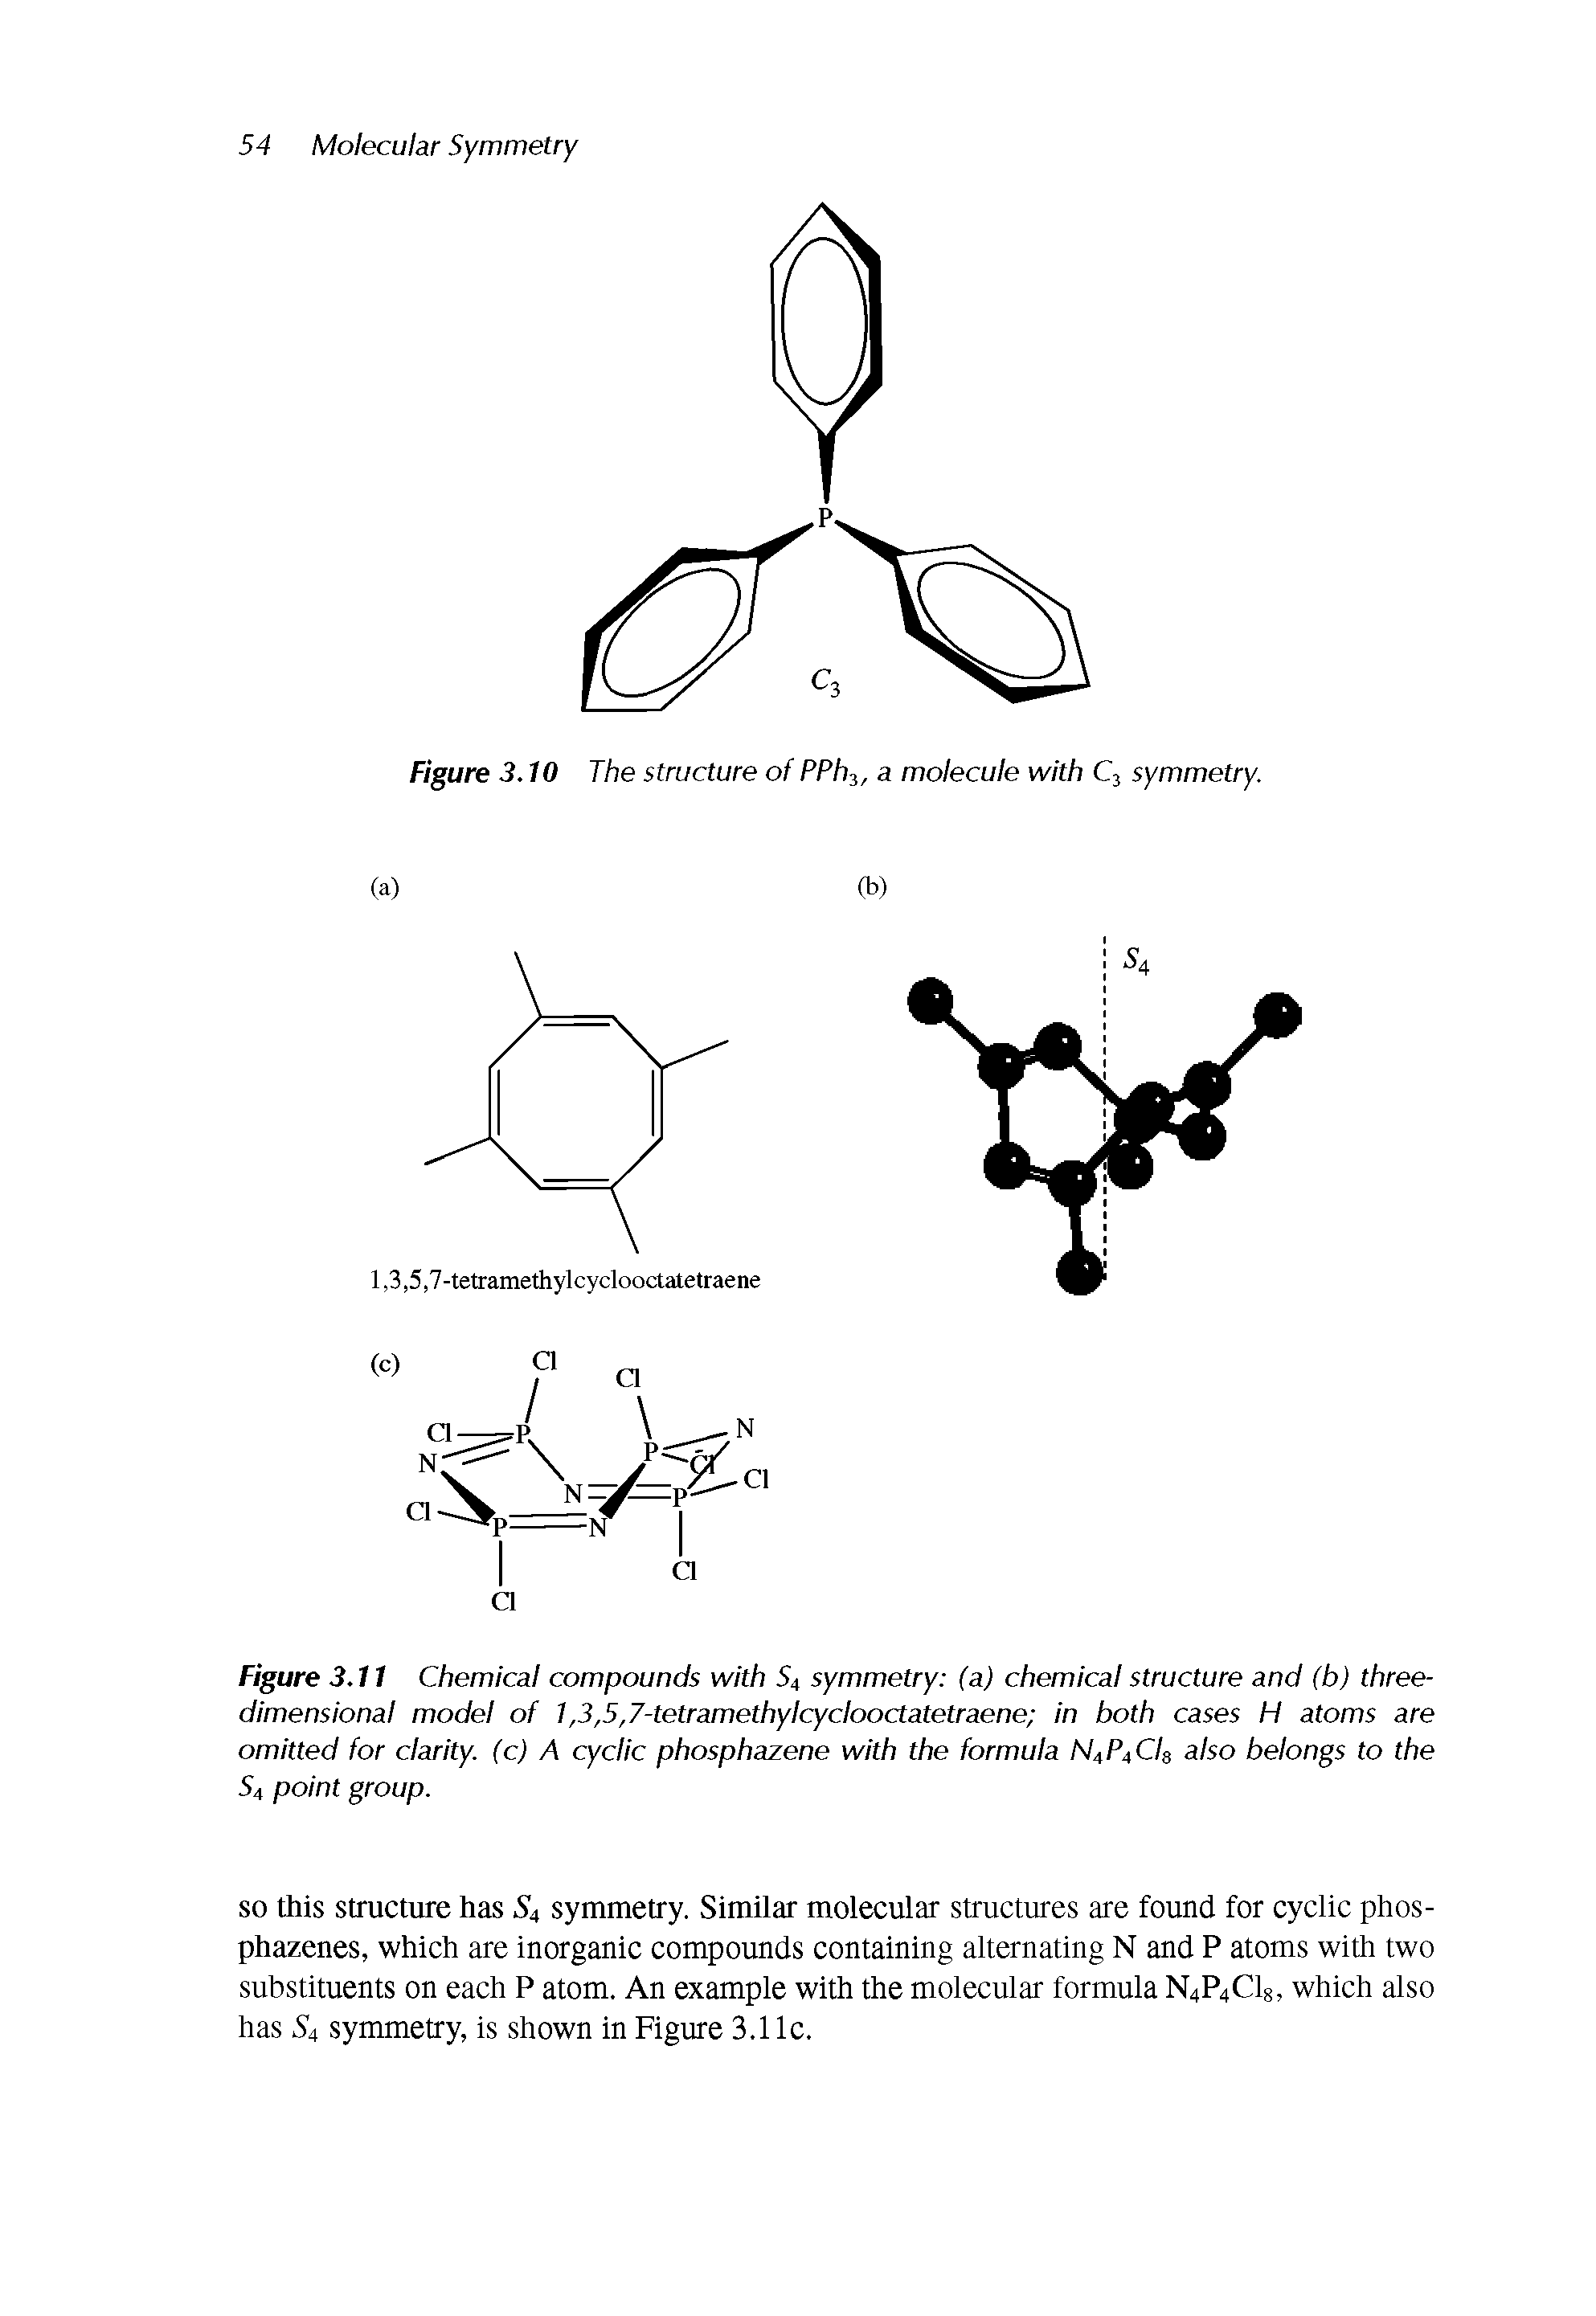 Figure 3.11 Chemical compounds with S4 symmetry (a) chemical structure and (b) three-dimensional model of 1,3,5,7-tetramethylcyclooctatetraene in both cases H atoms are omitted for clarity, (c) A cyclic pbospbazene with the formula N4P4CIS also belongs to the S4 point group.